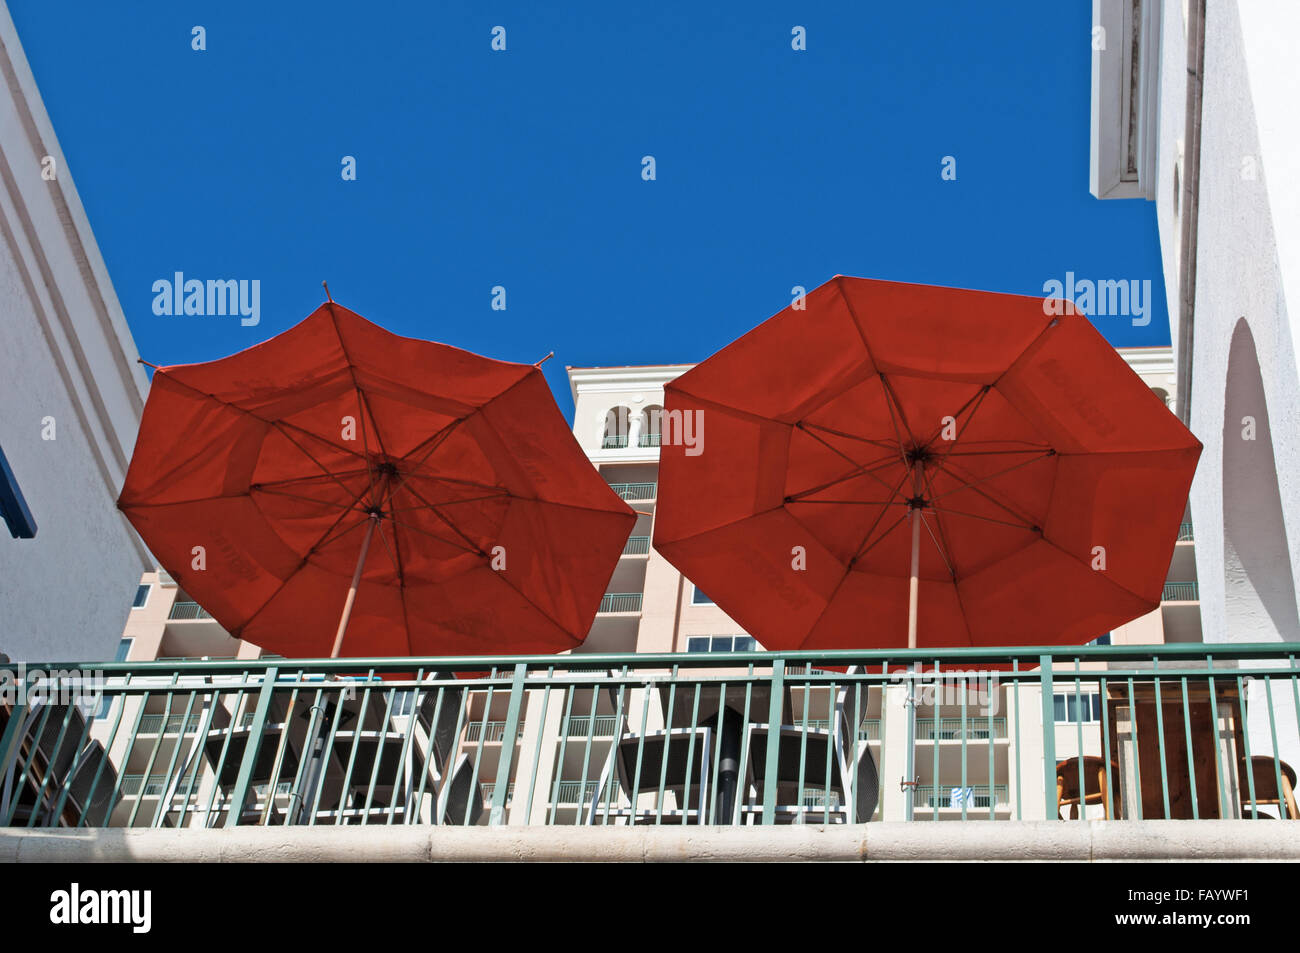 United States of America, Florida: red beach umbrellas on a  white building in Fort Lauderdale, Ft. Lauderdale, skyline, relax Stock Photo